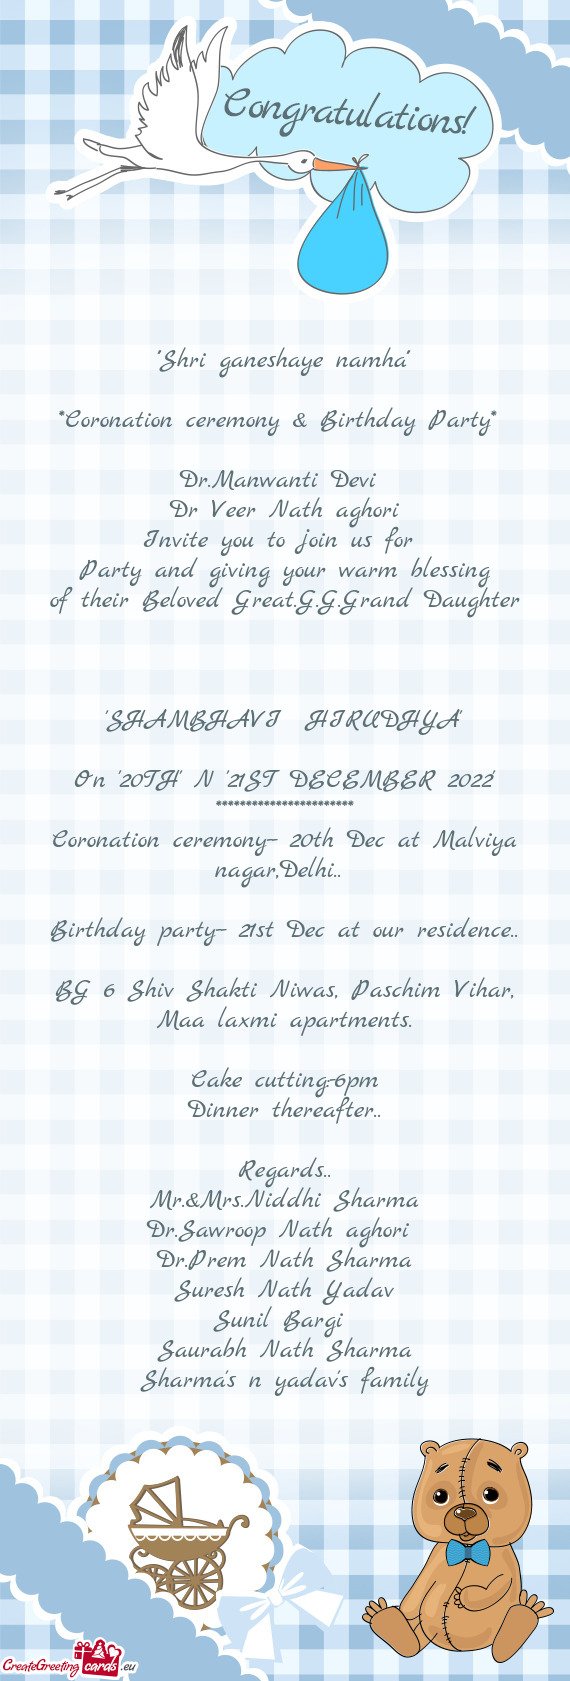 Birthday party-- 21st Dec at our residence